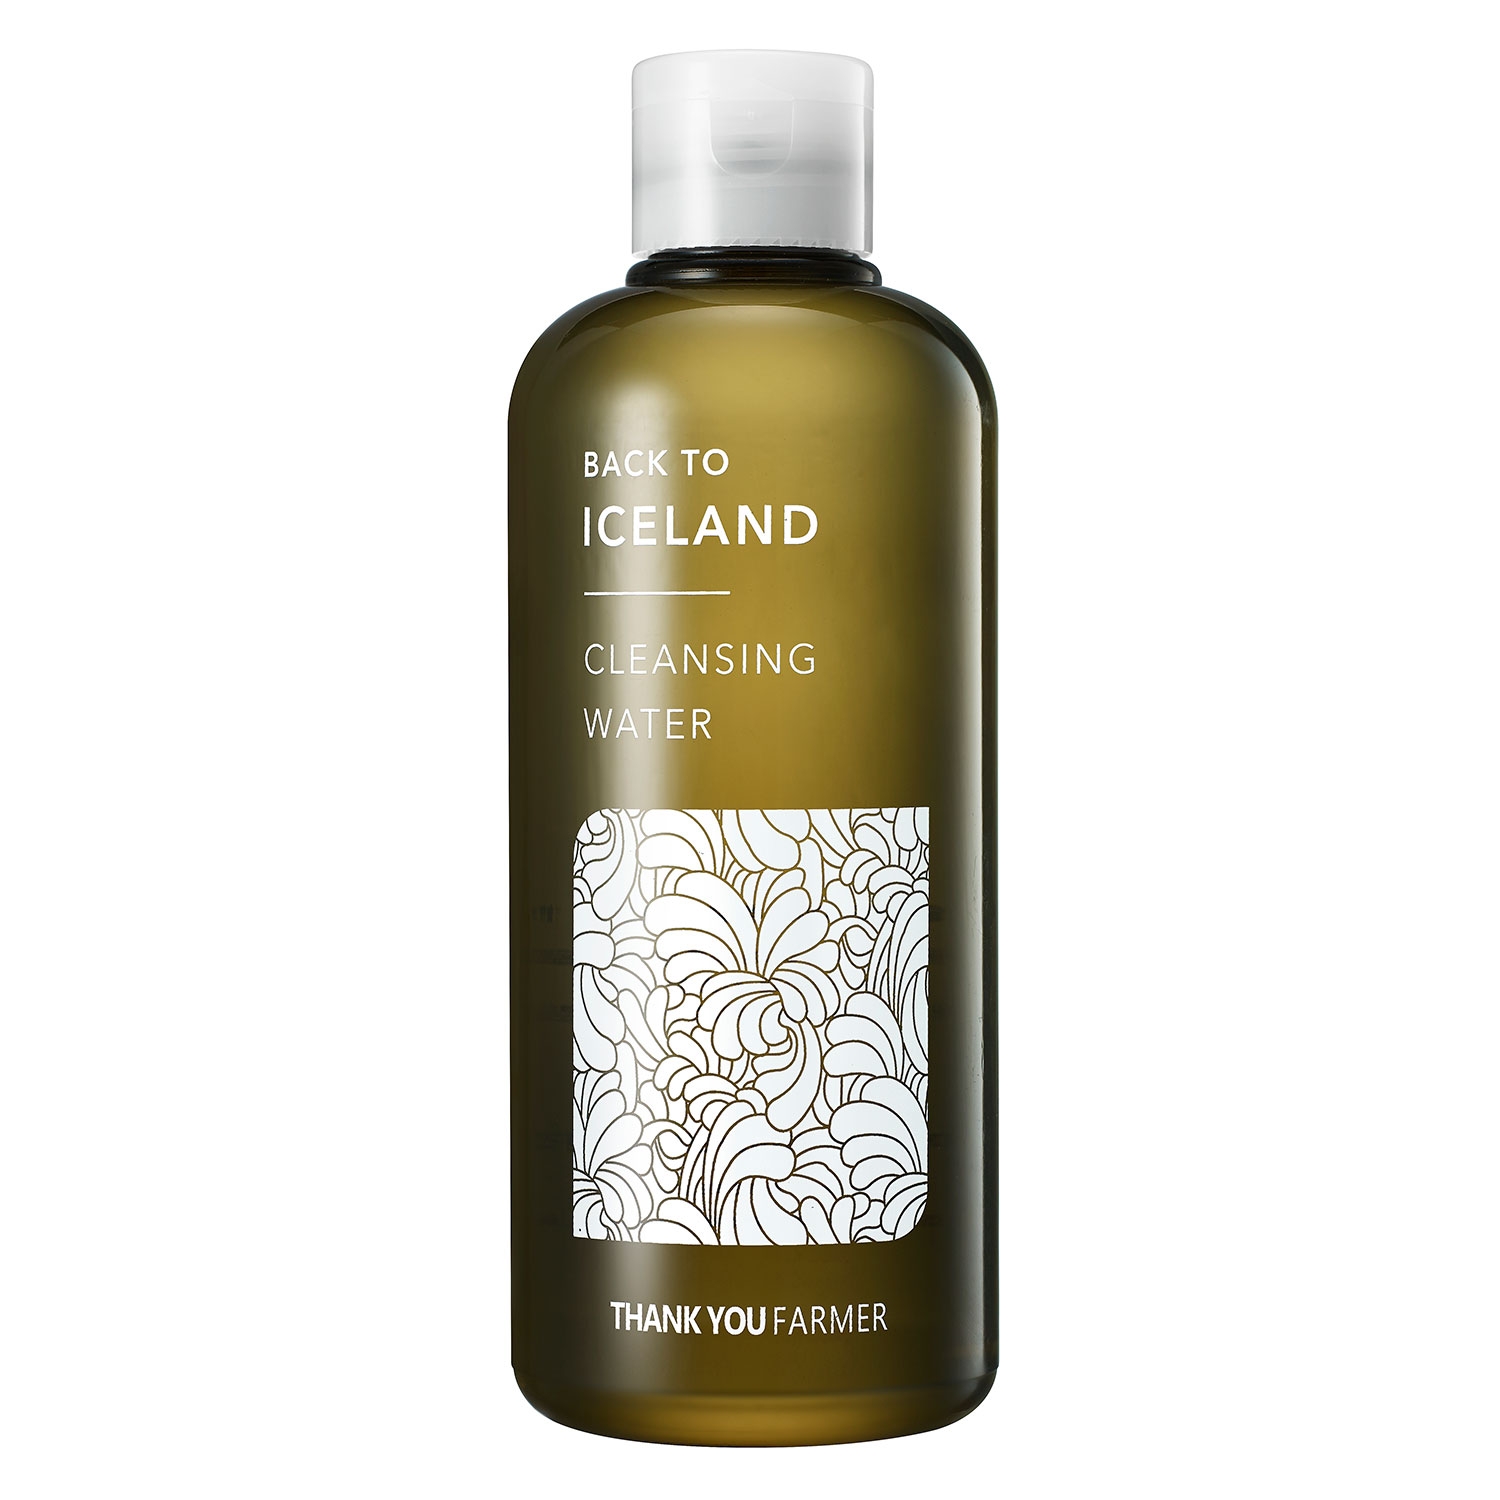 Product image from THANK YOU FARMER - Back To Iceland Cleansing Water